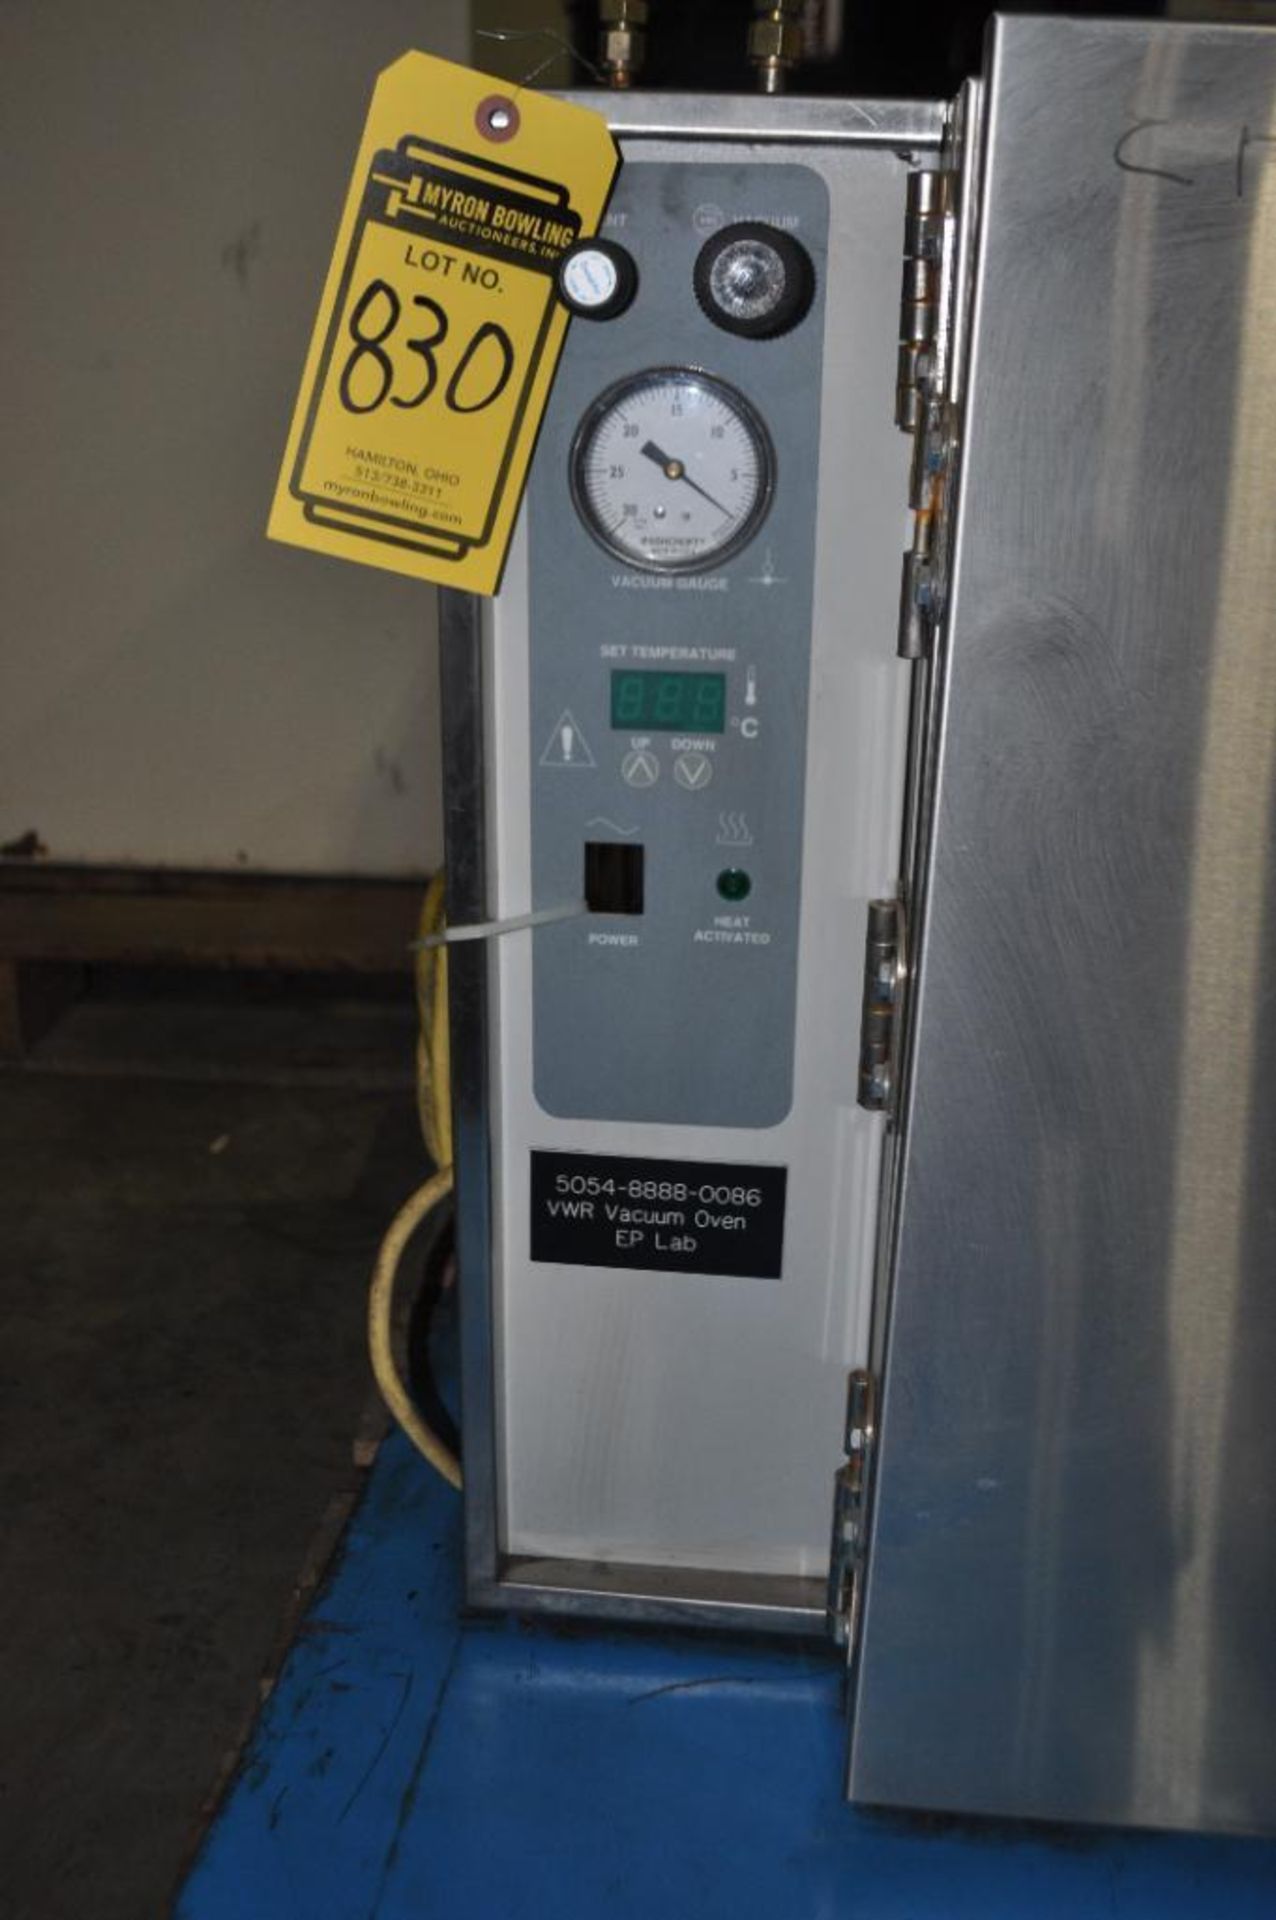 VWR STAINLESS STEEL VACUUM OVEN, MODEL: 1450M-2, 220 VOLTS - Image 2 of 5